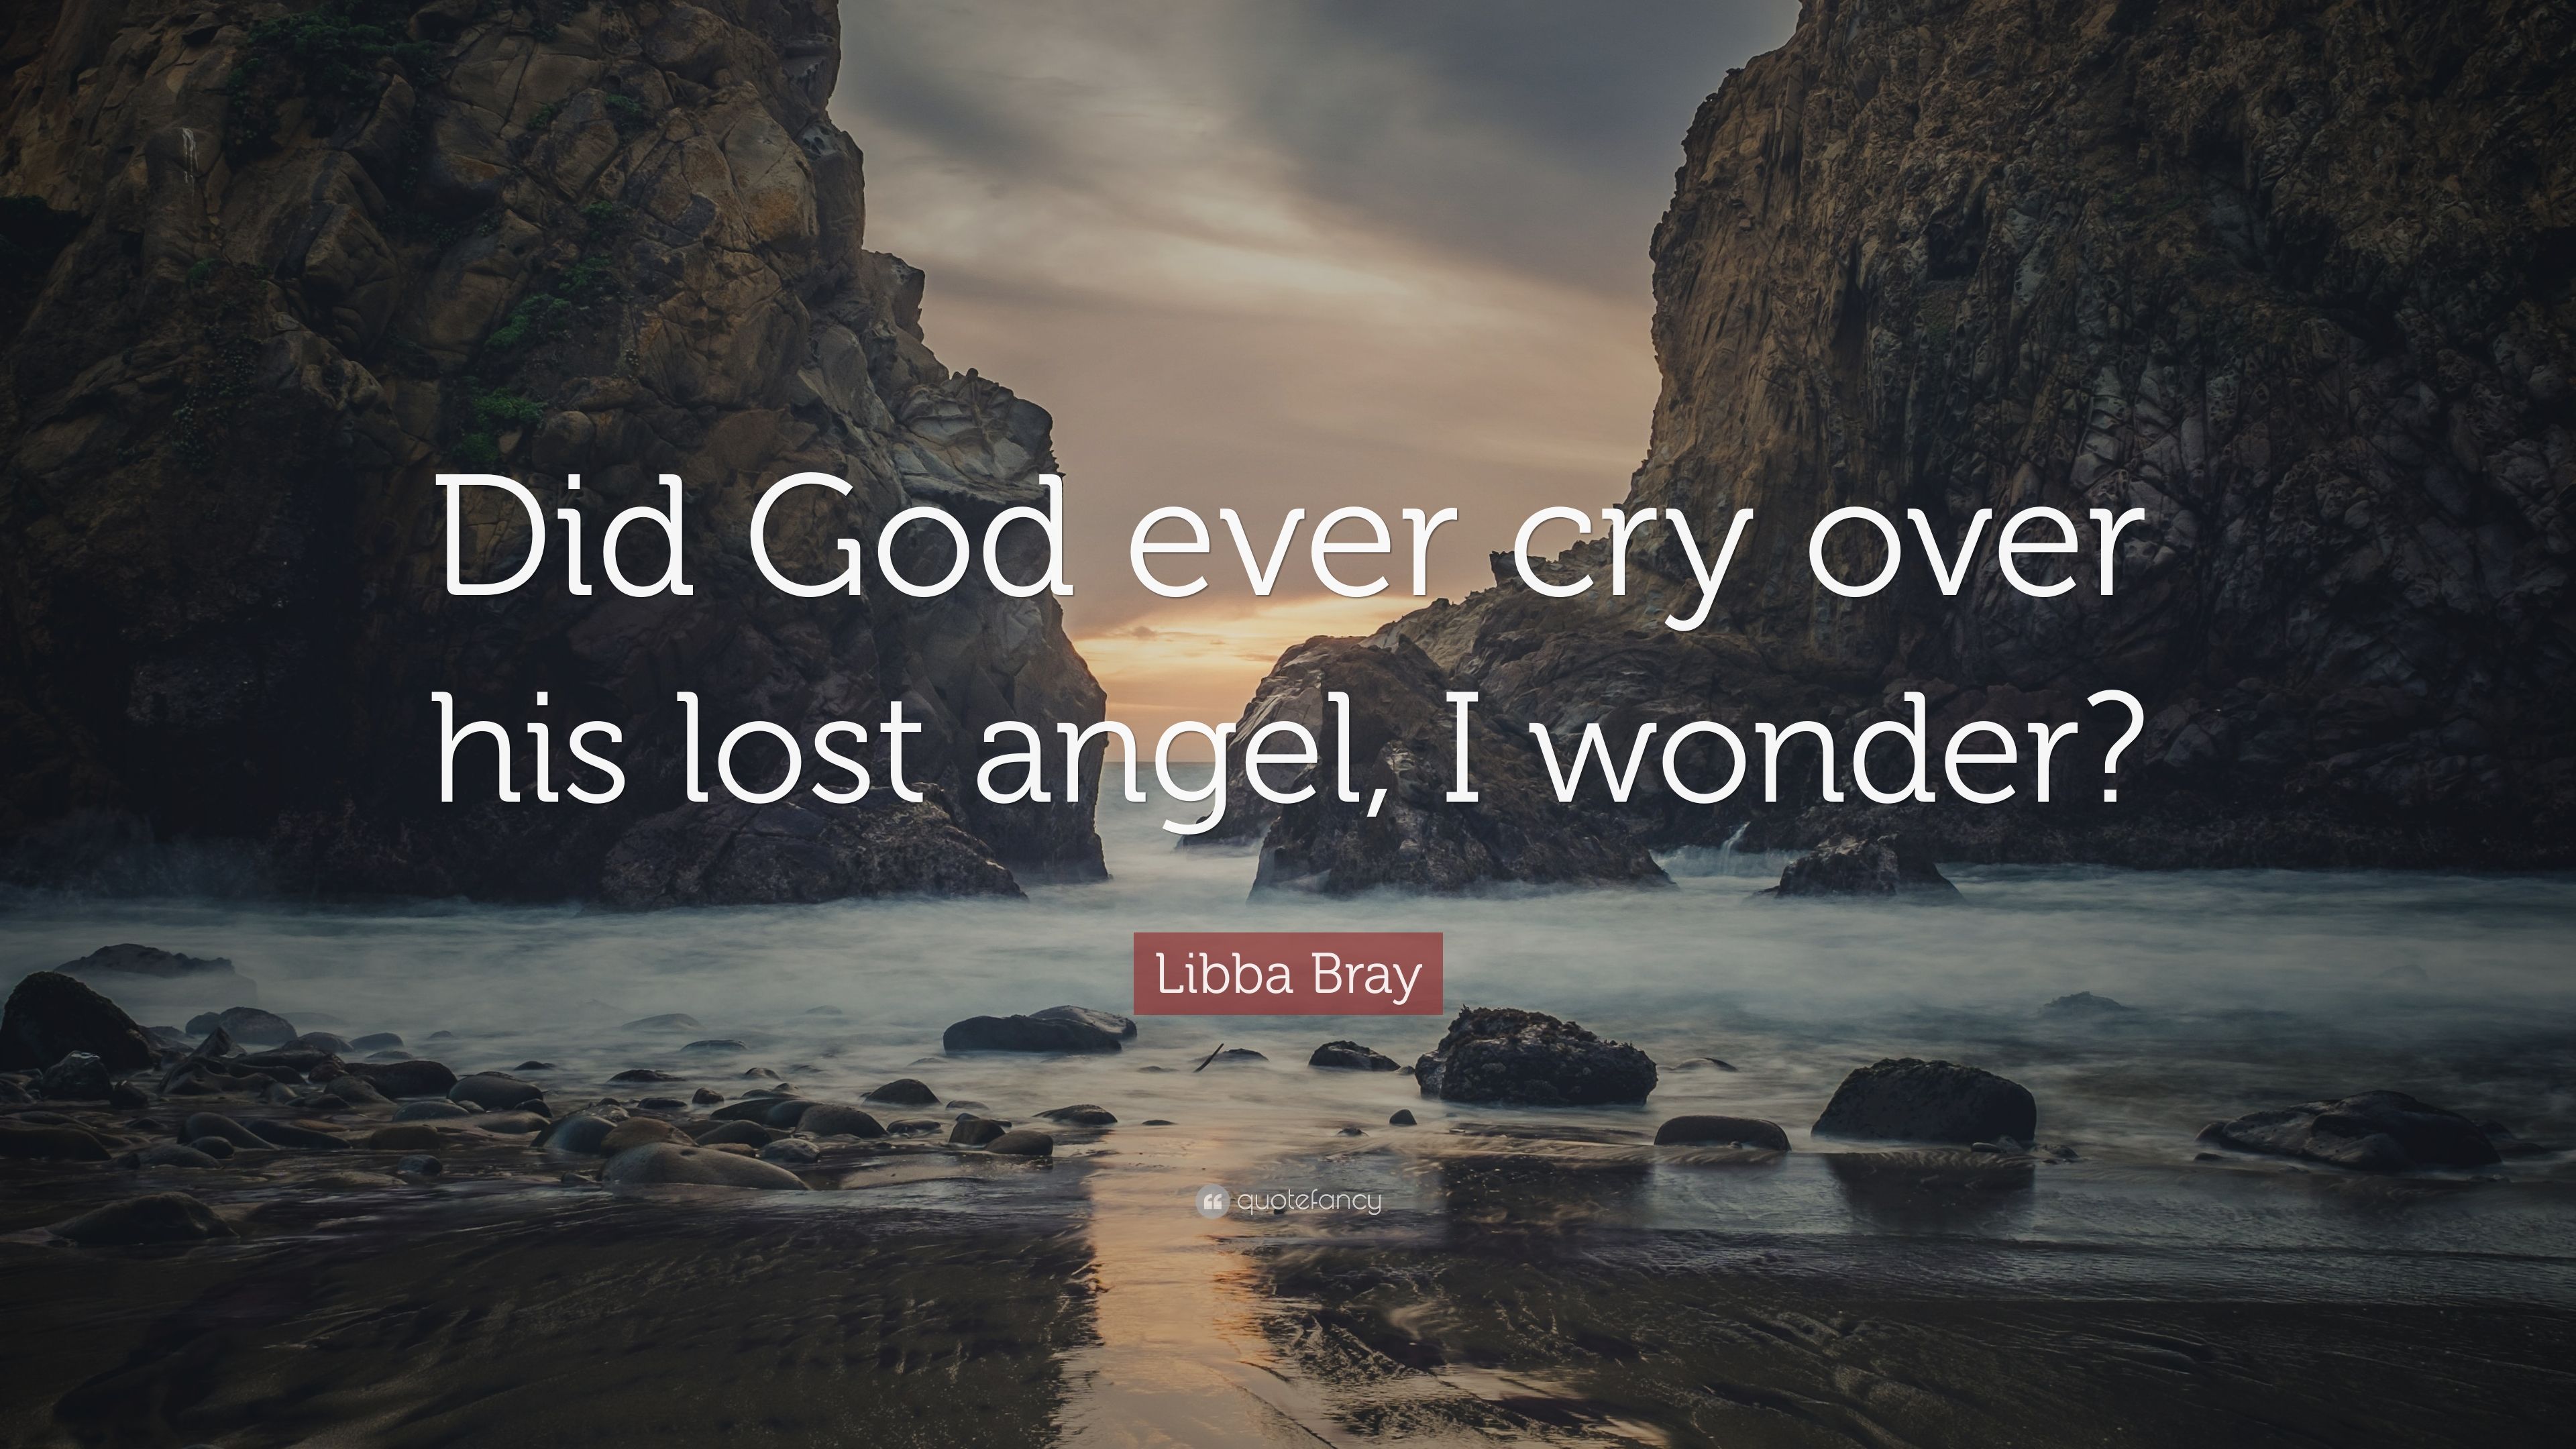 Libba Bray Quote: "Did God ever cry over his lost angel, I wonder. 